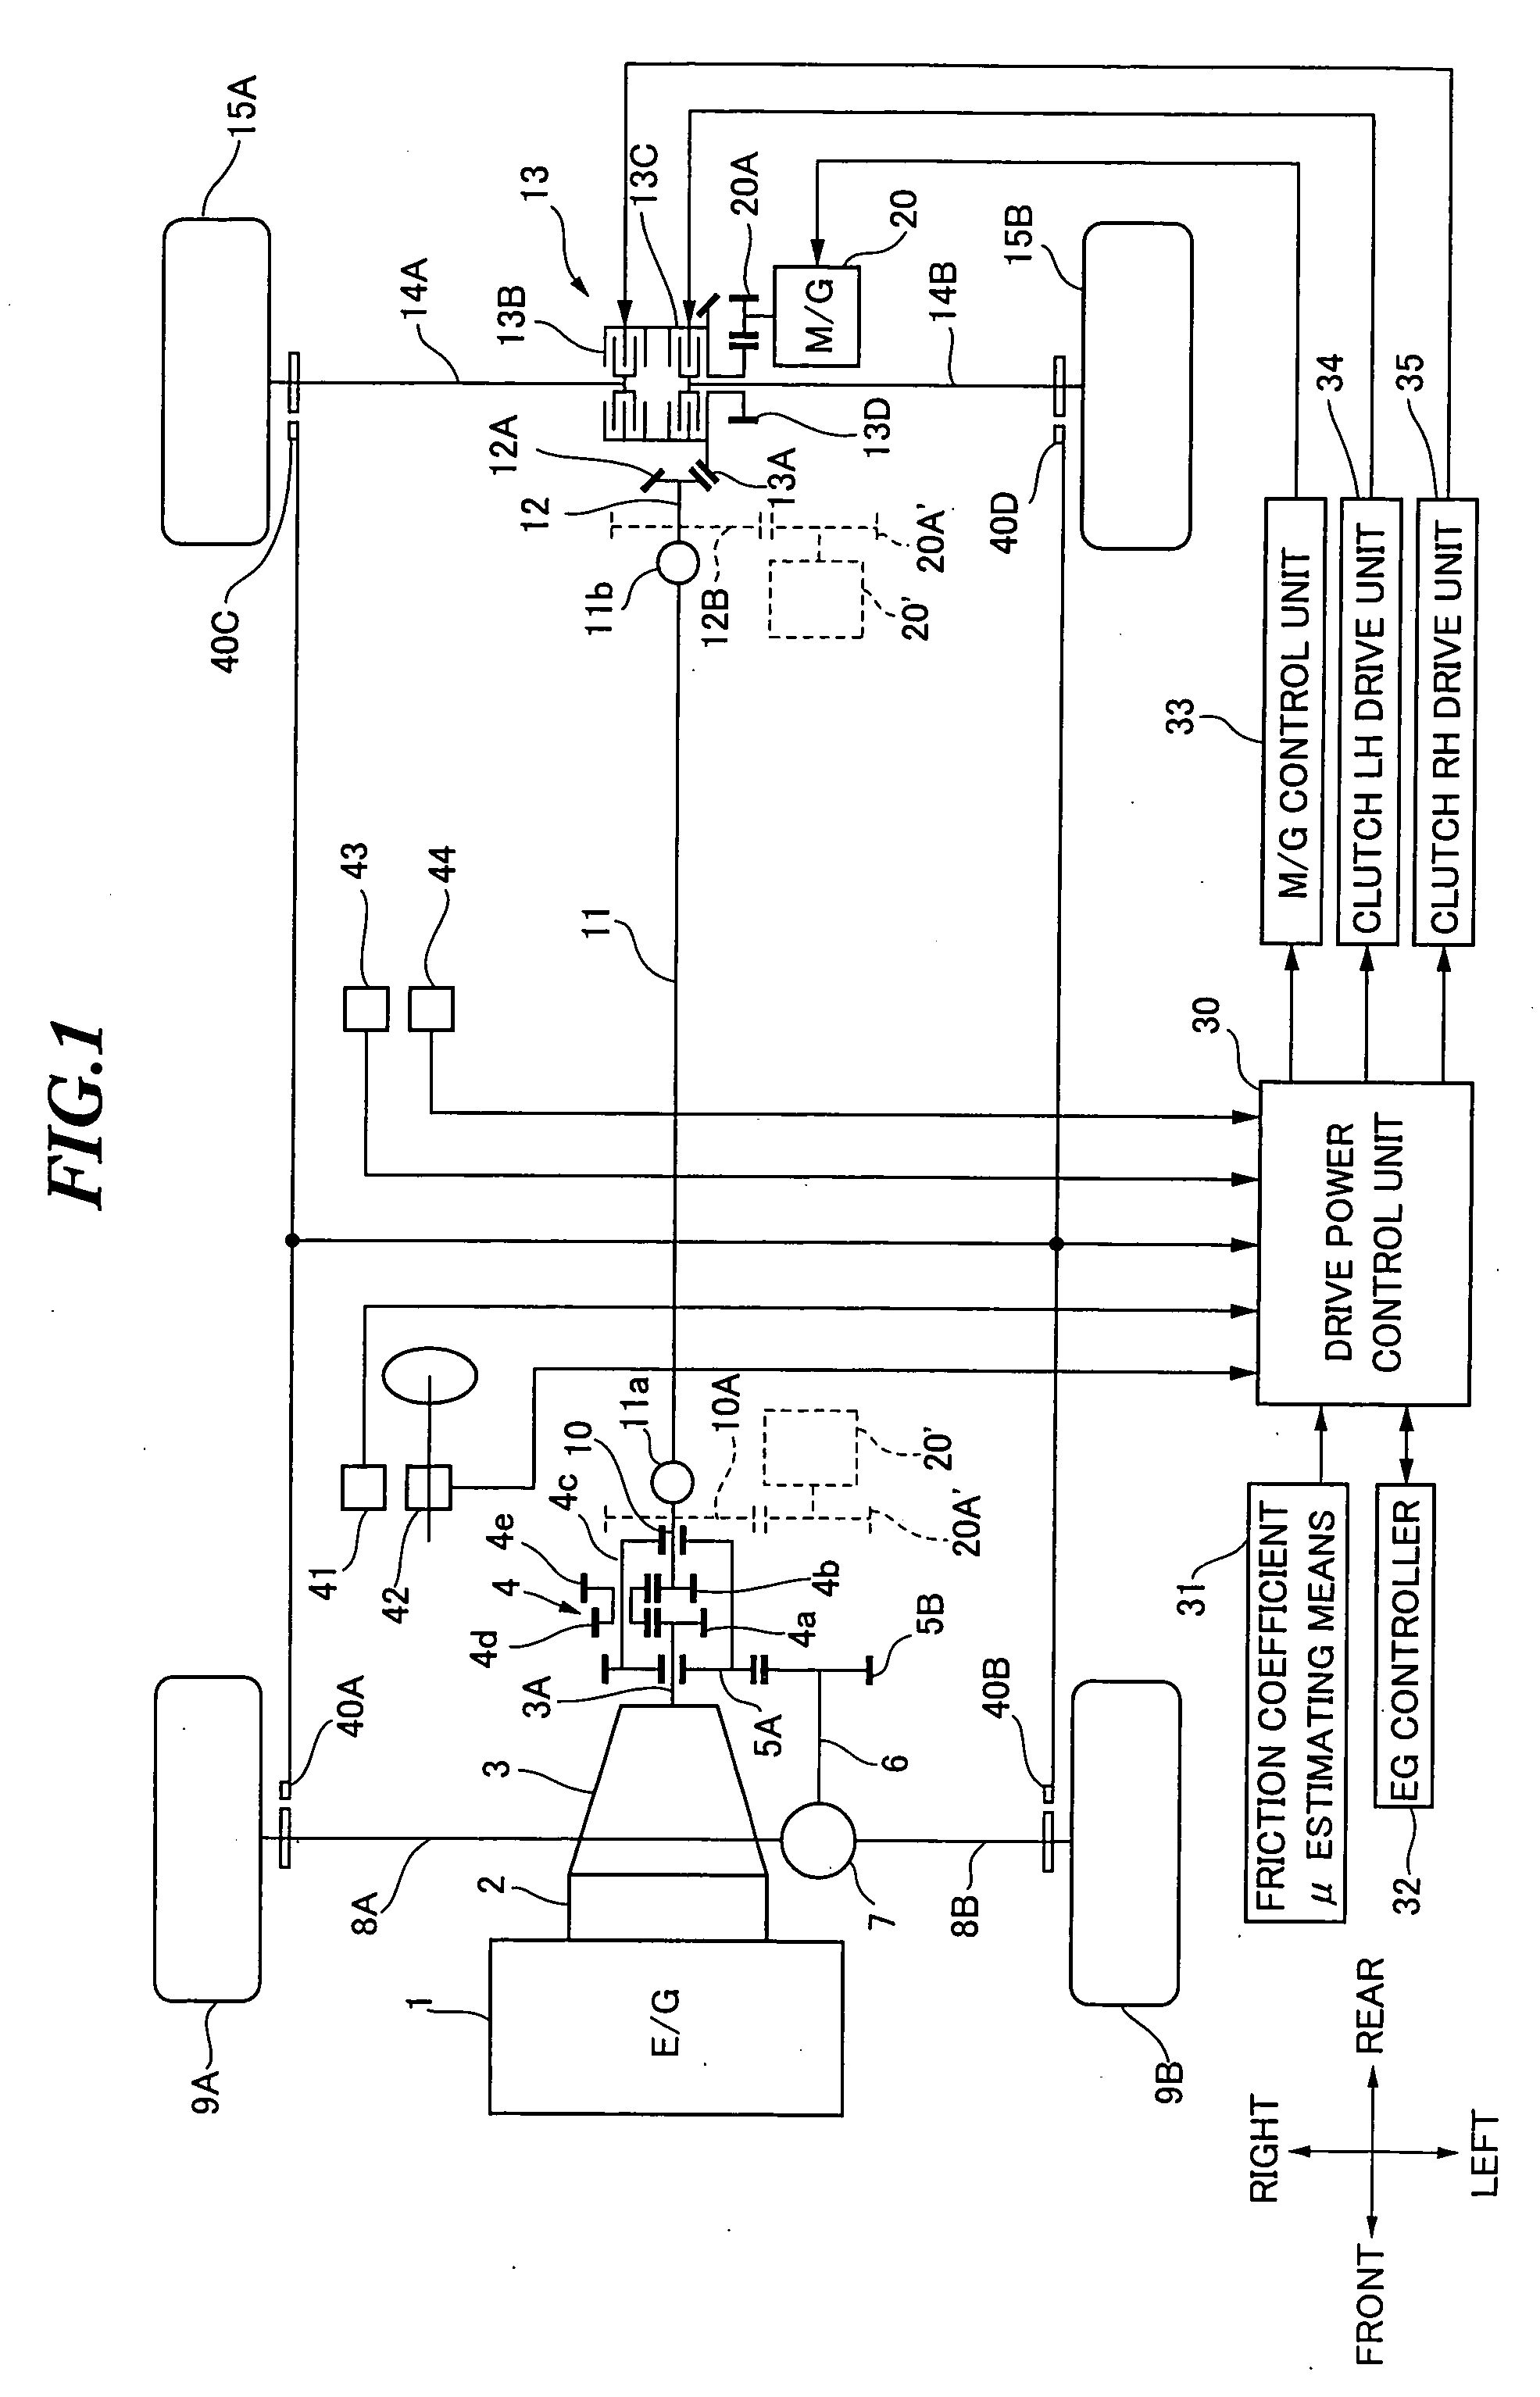 Drive power controller for hybrid vehicle